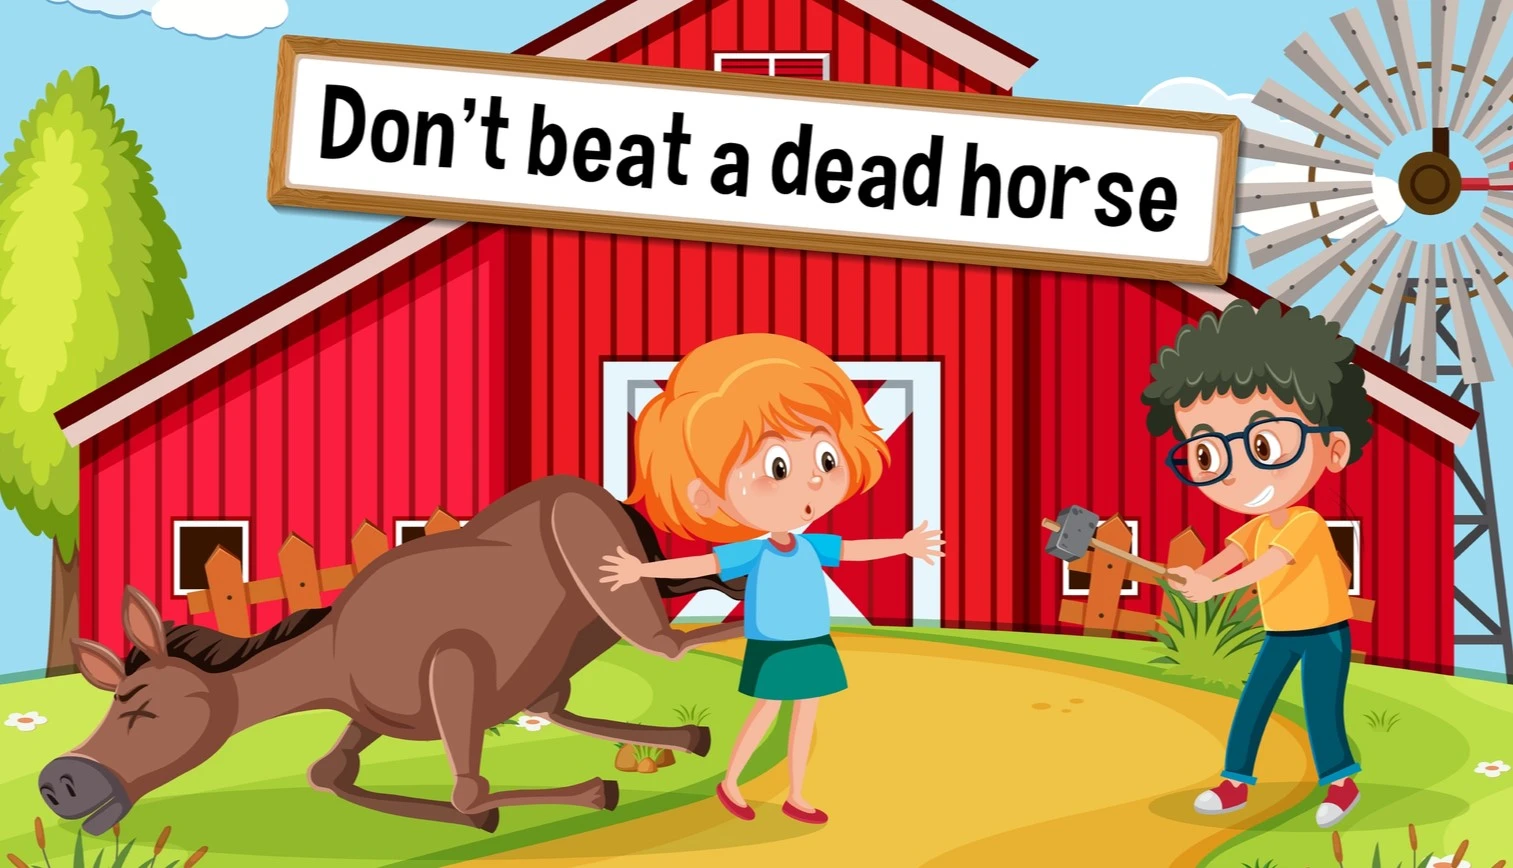 Horse idioms, you can flog a dead horse saying